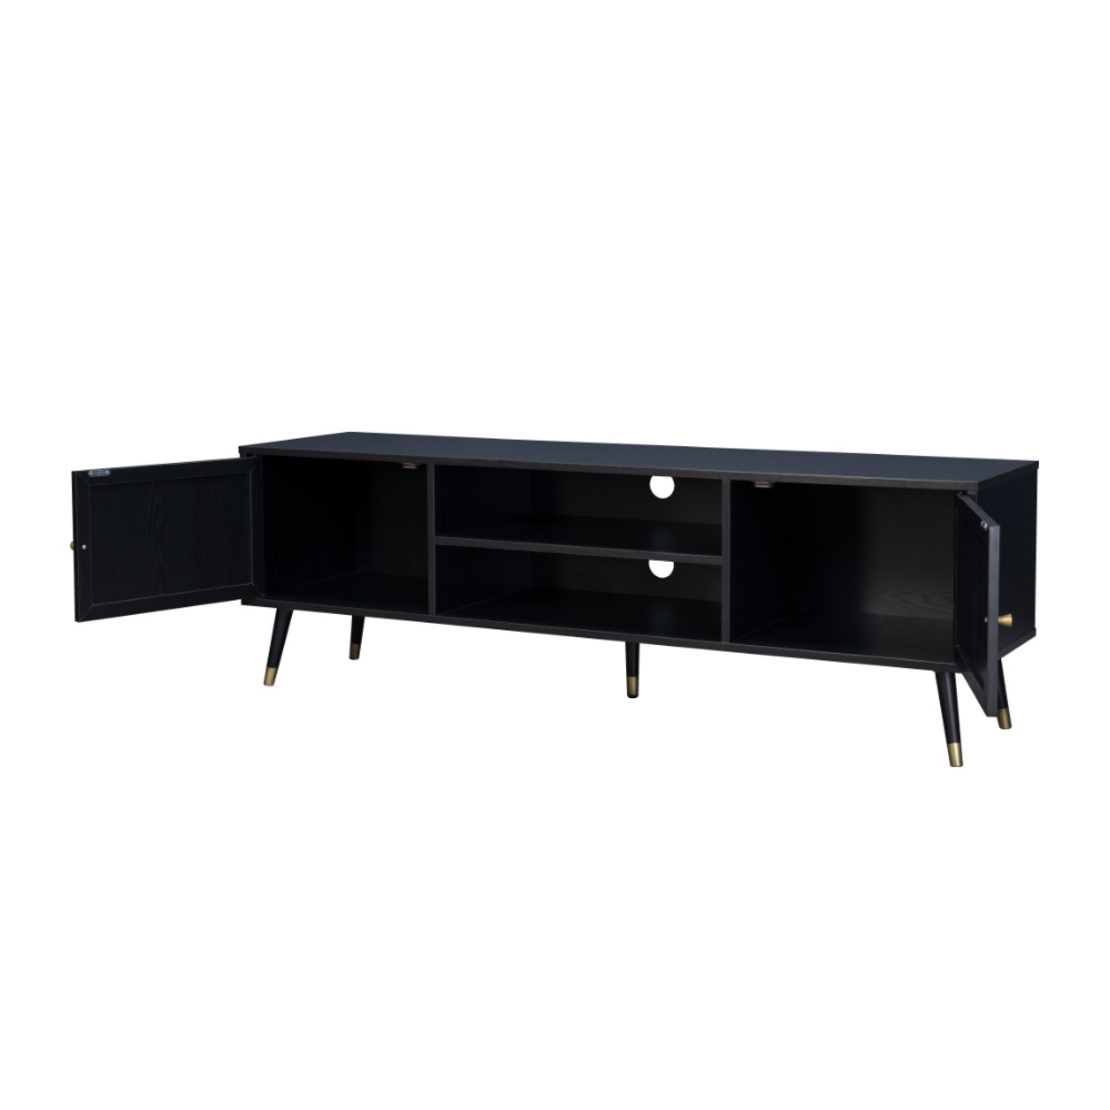 VIENNA TV STAND CHIPBOARD WITH MELAMINE BLACK WITH RATTAN GOLD 150x39xH49cm E1 PRC